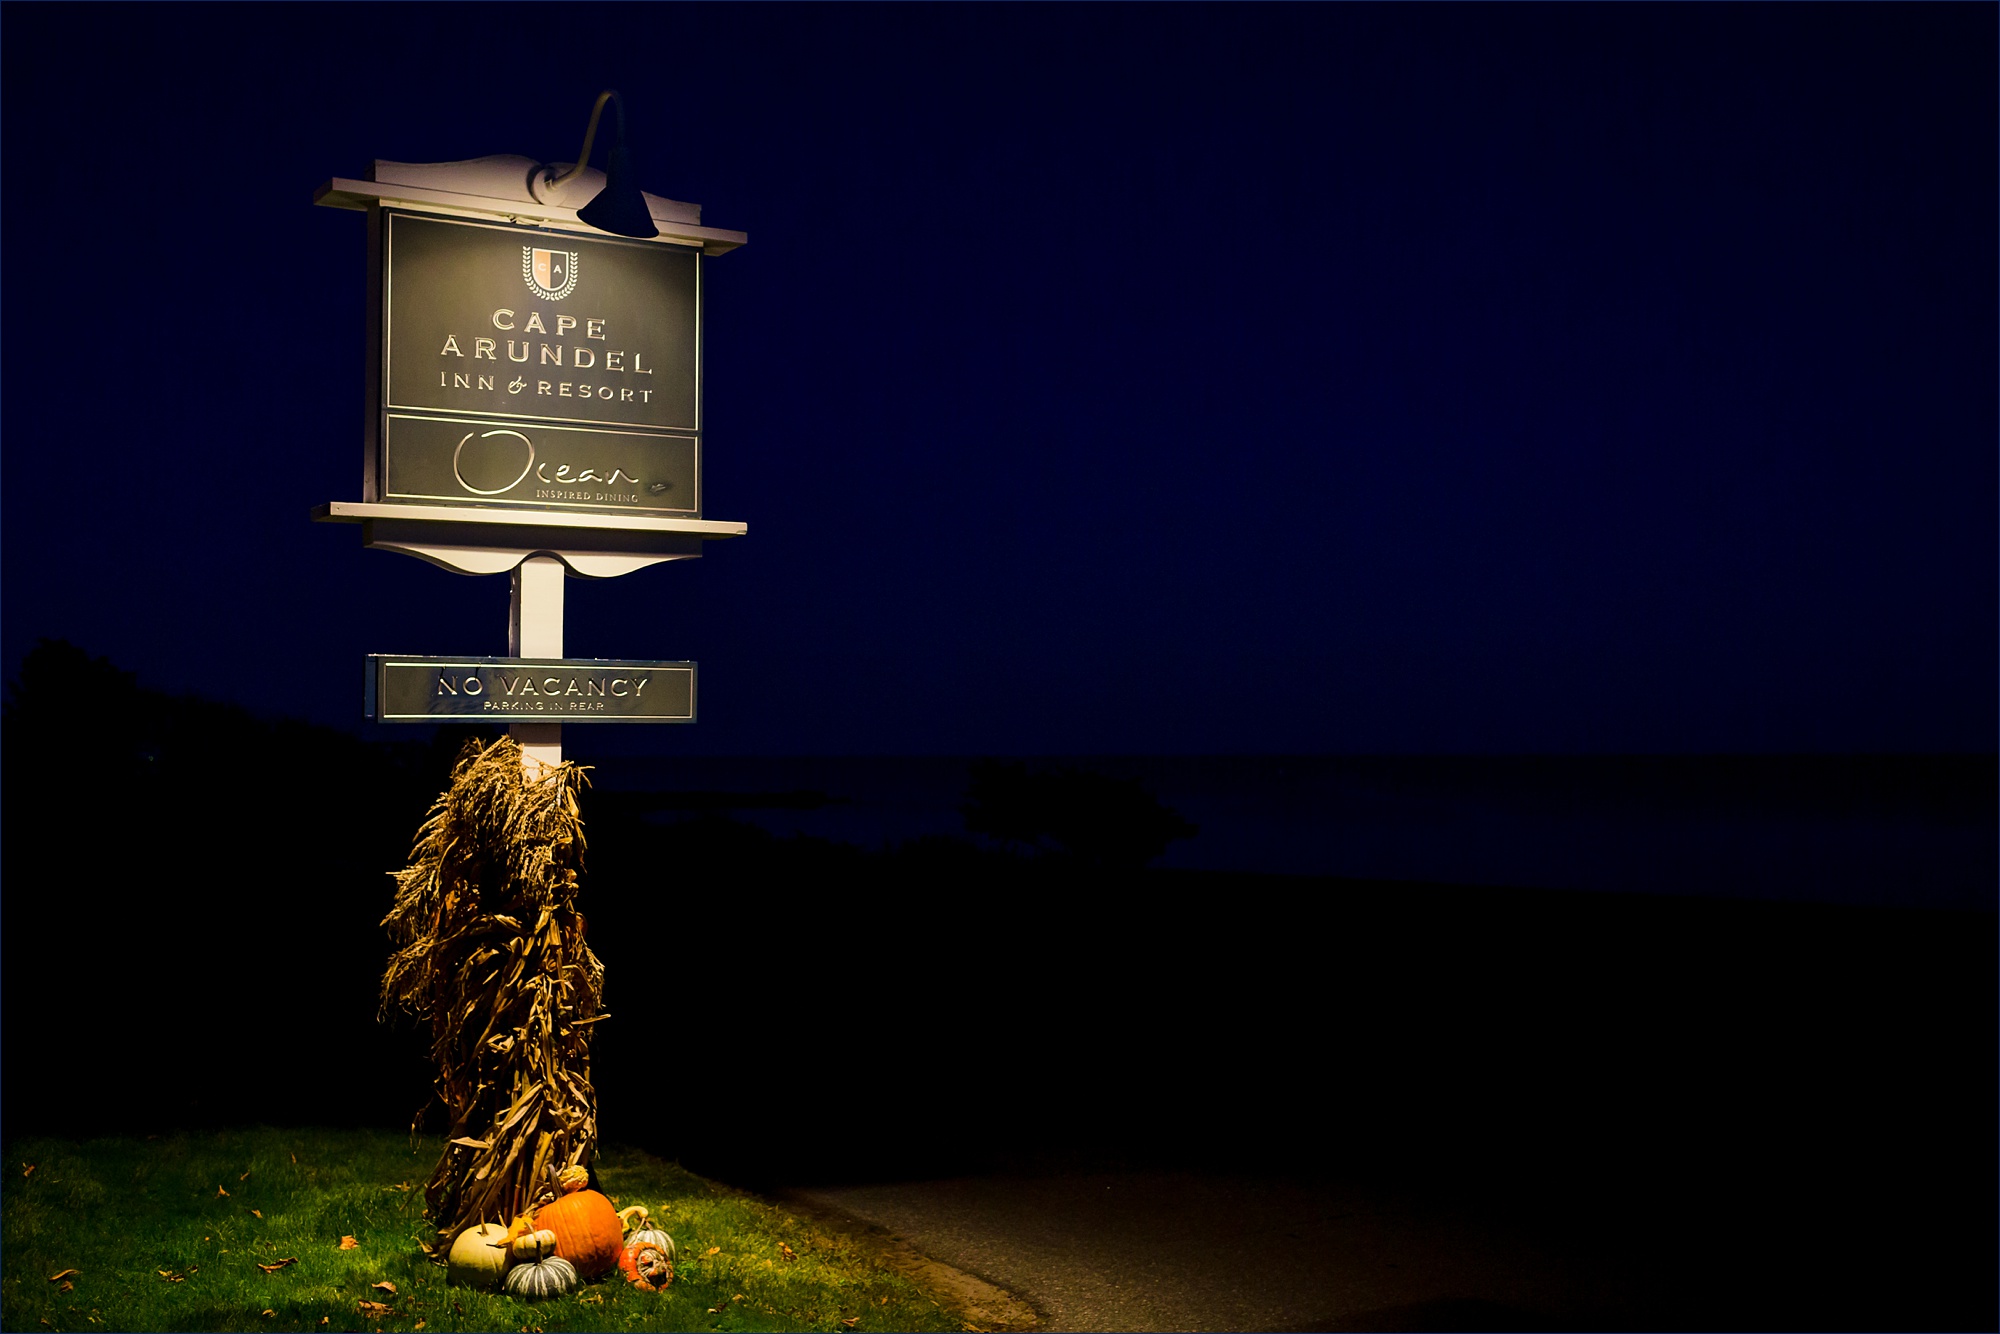 Cape Arundel Inn sign on the couple's wedding day at night